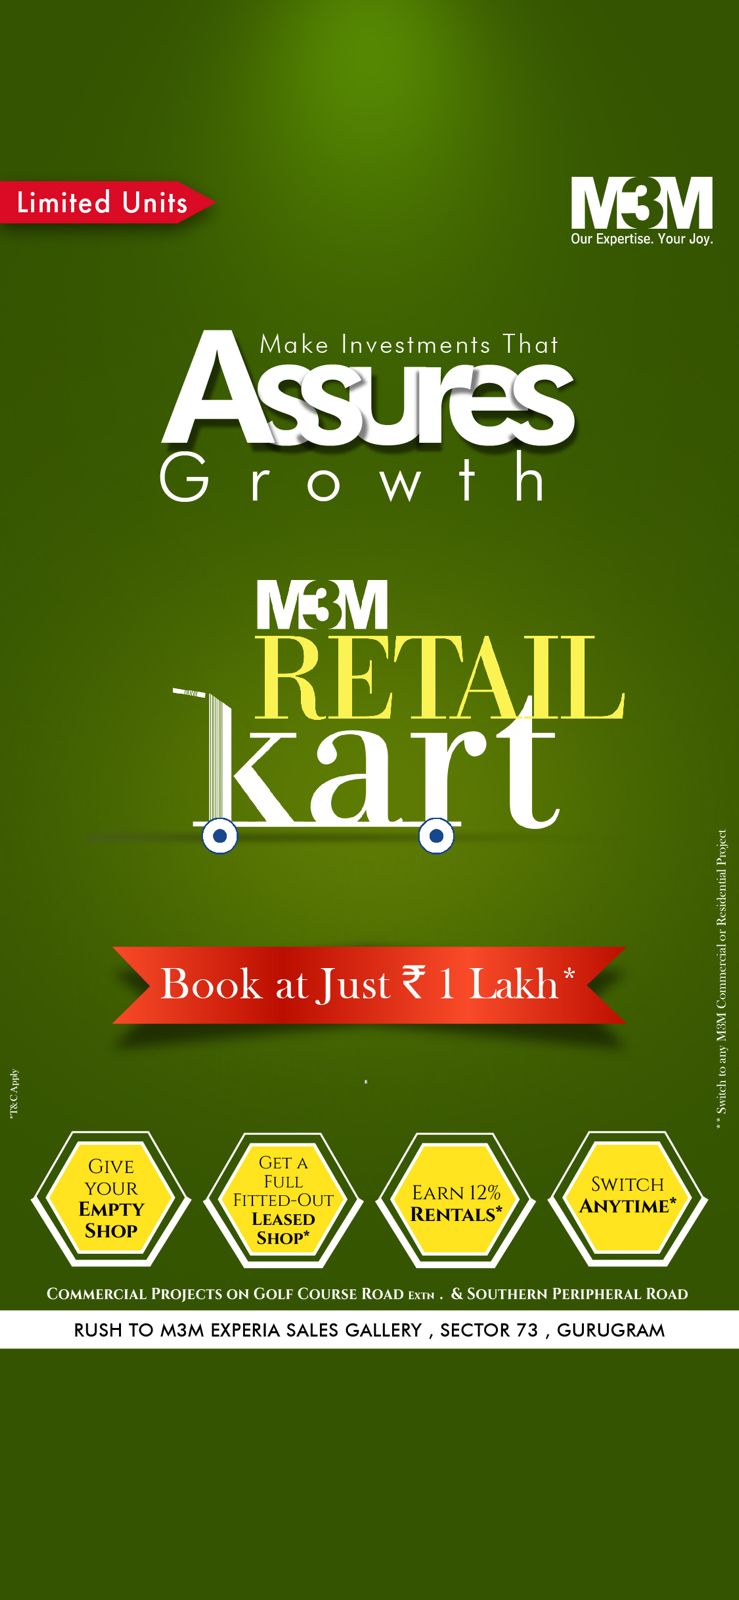 Make Investments that assures Growt at M3M Retail Kart